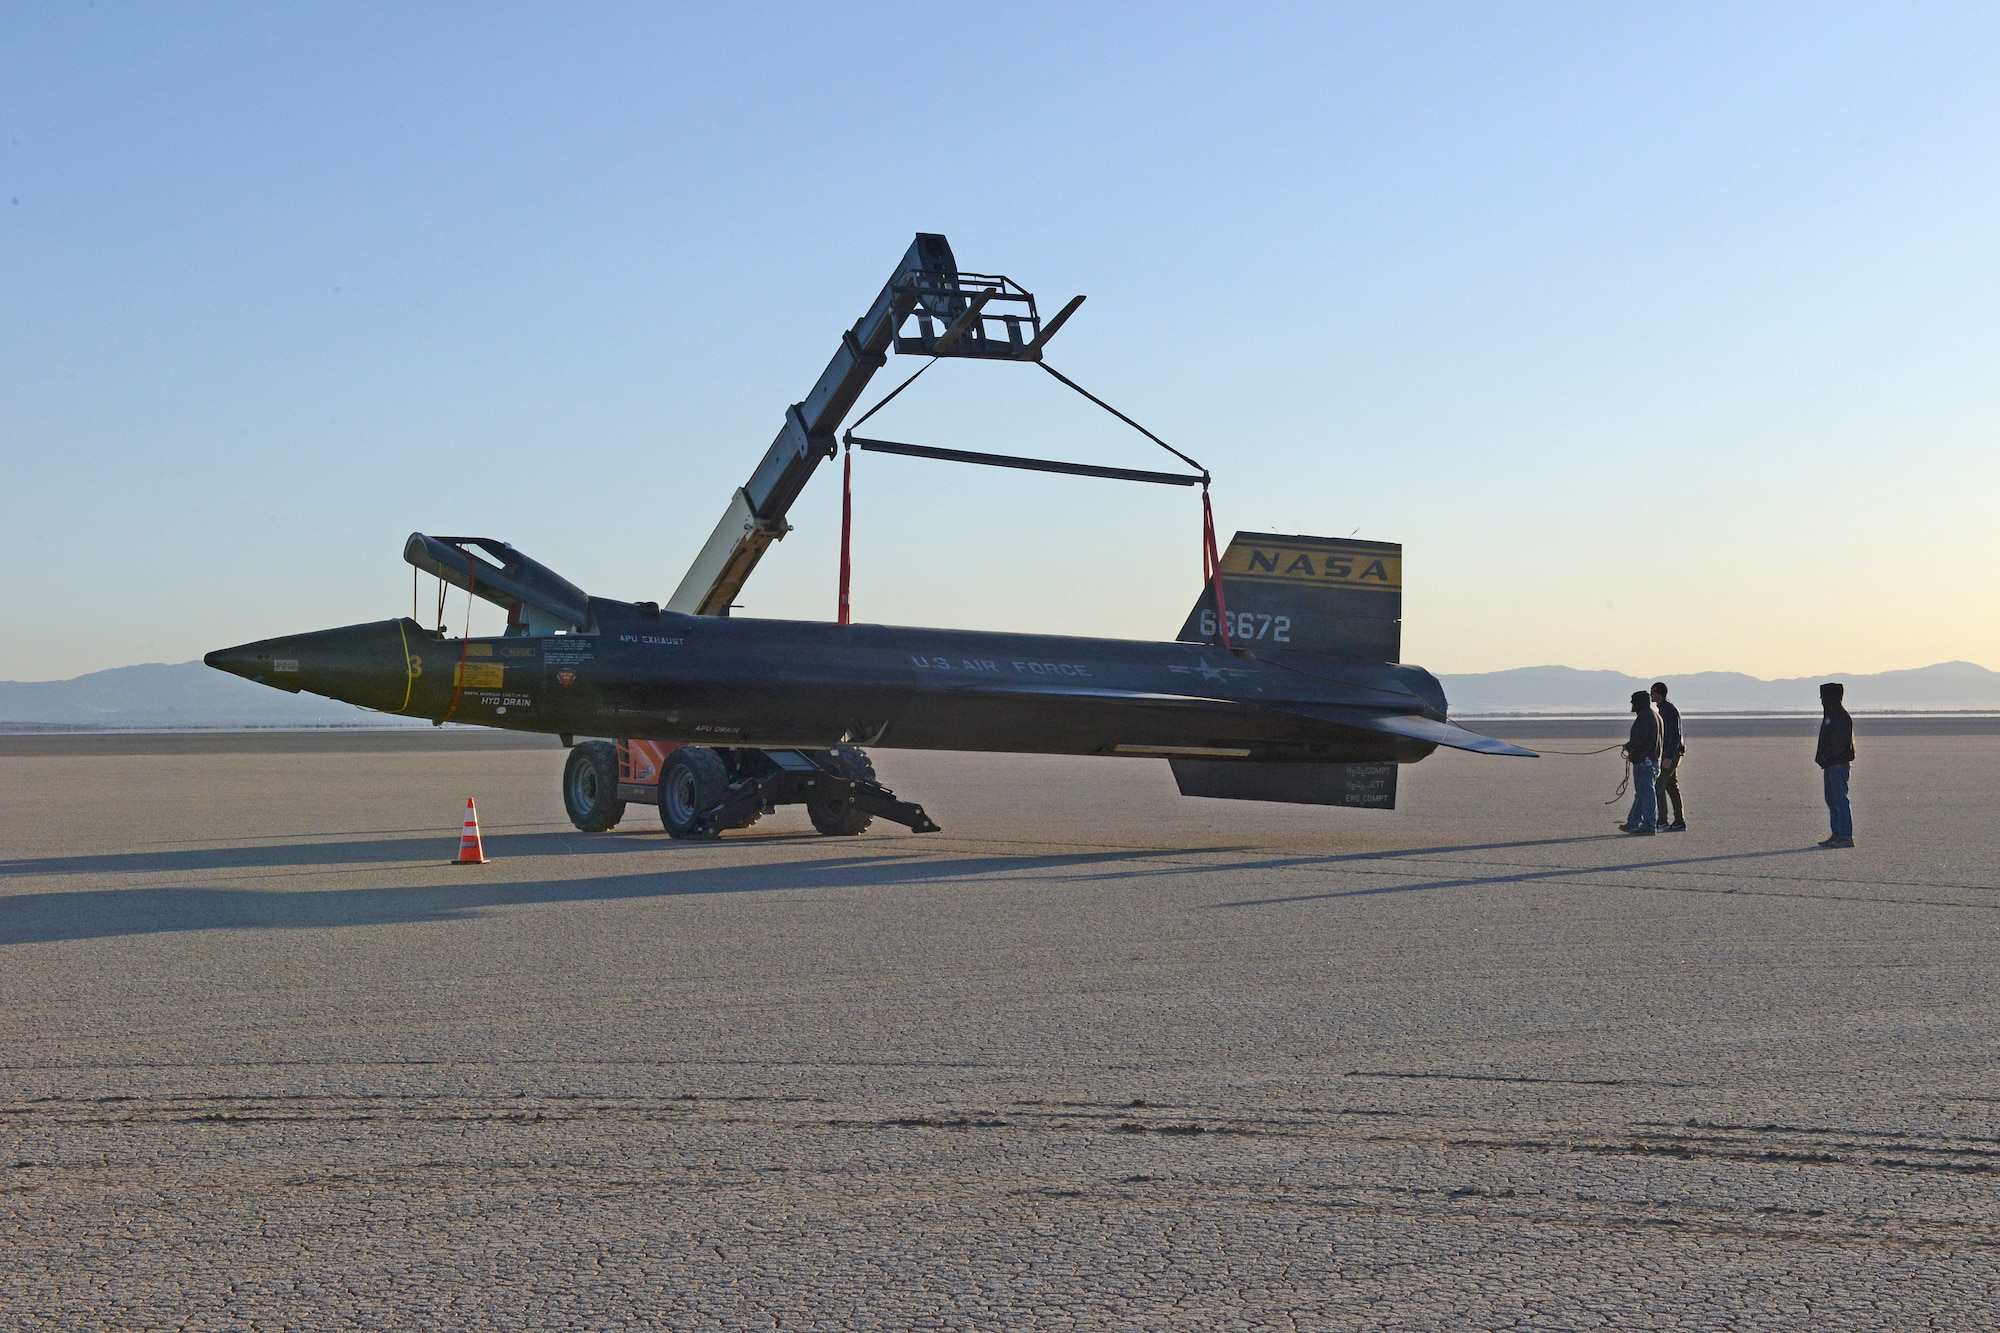 A mockup of an X-15 rocket plane being placed on Rosamond Dry Lakebed at Edwards Air Force Base, California, Feb. 21, 2018, for a scene in the film "First Man." (U.S. Air Force photo by Kenji Thuloweit